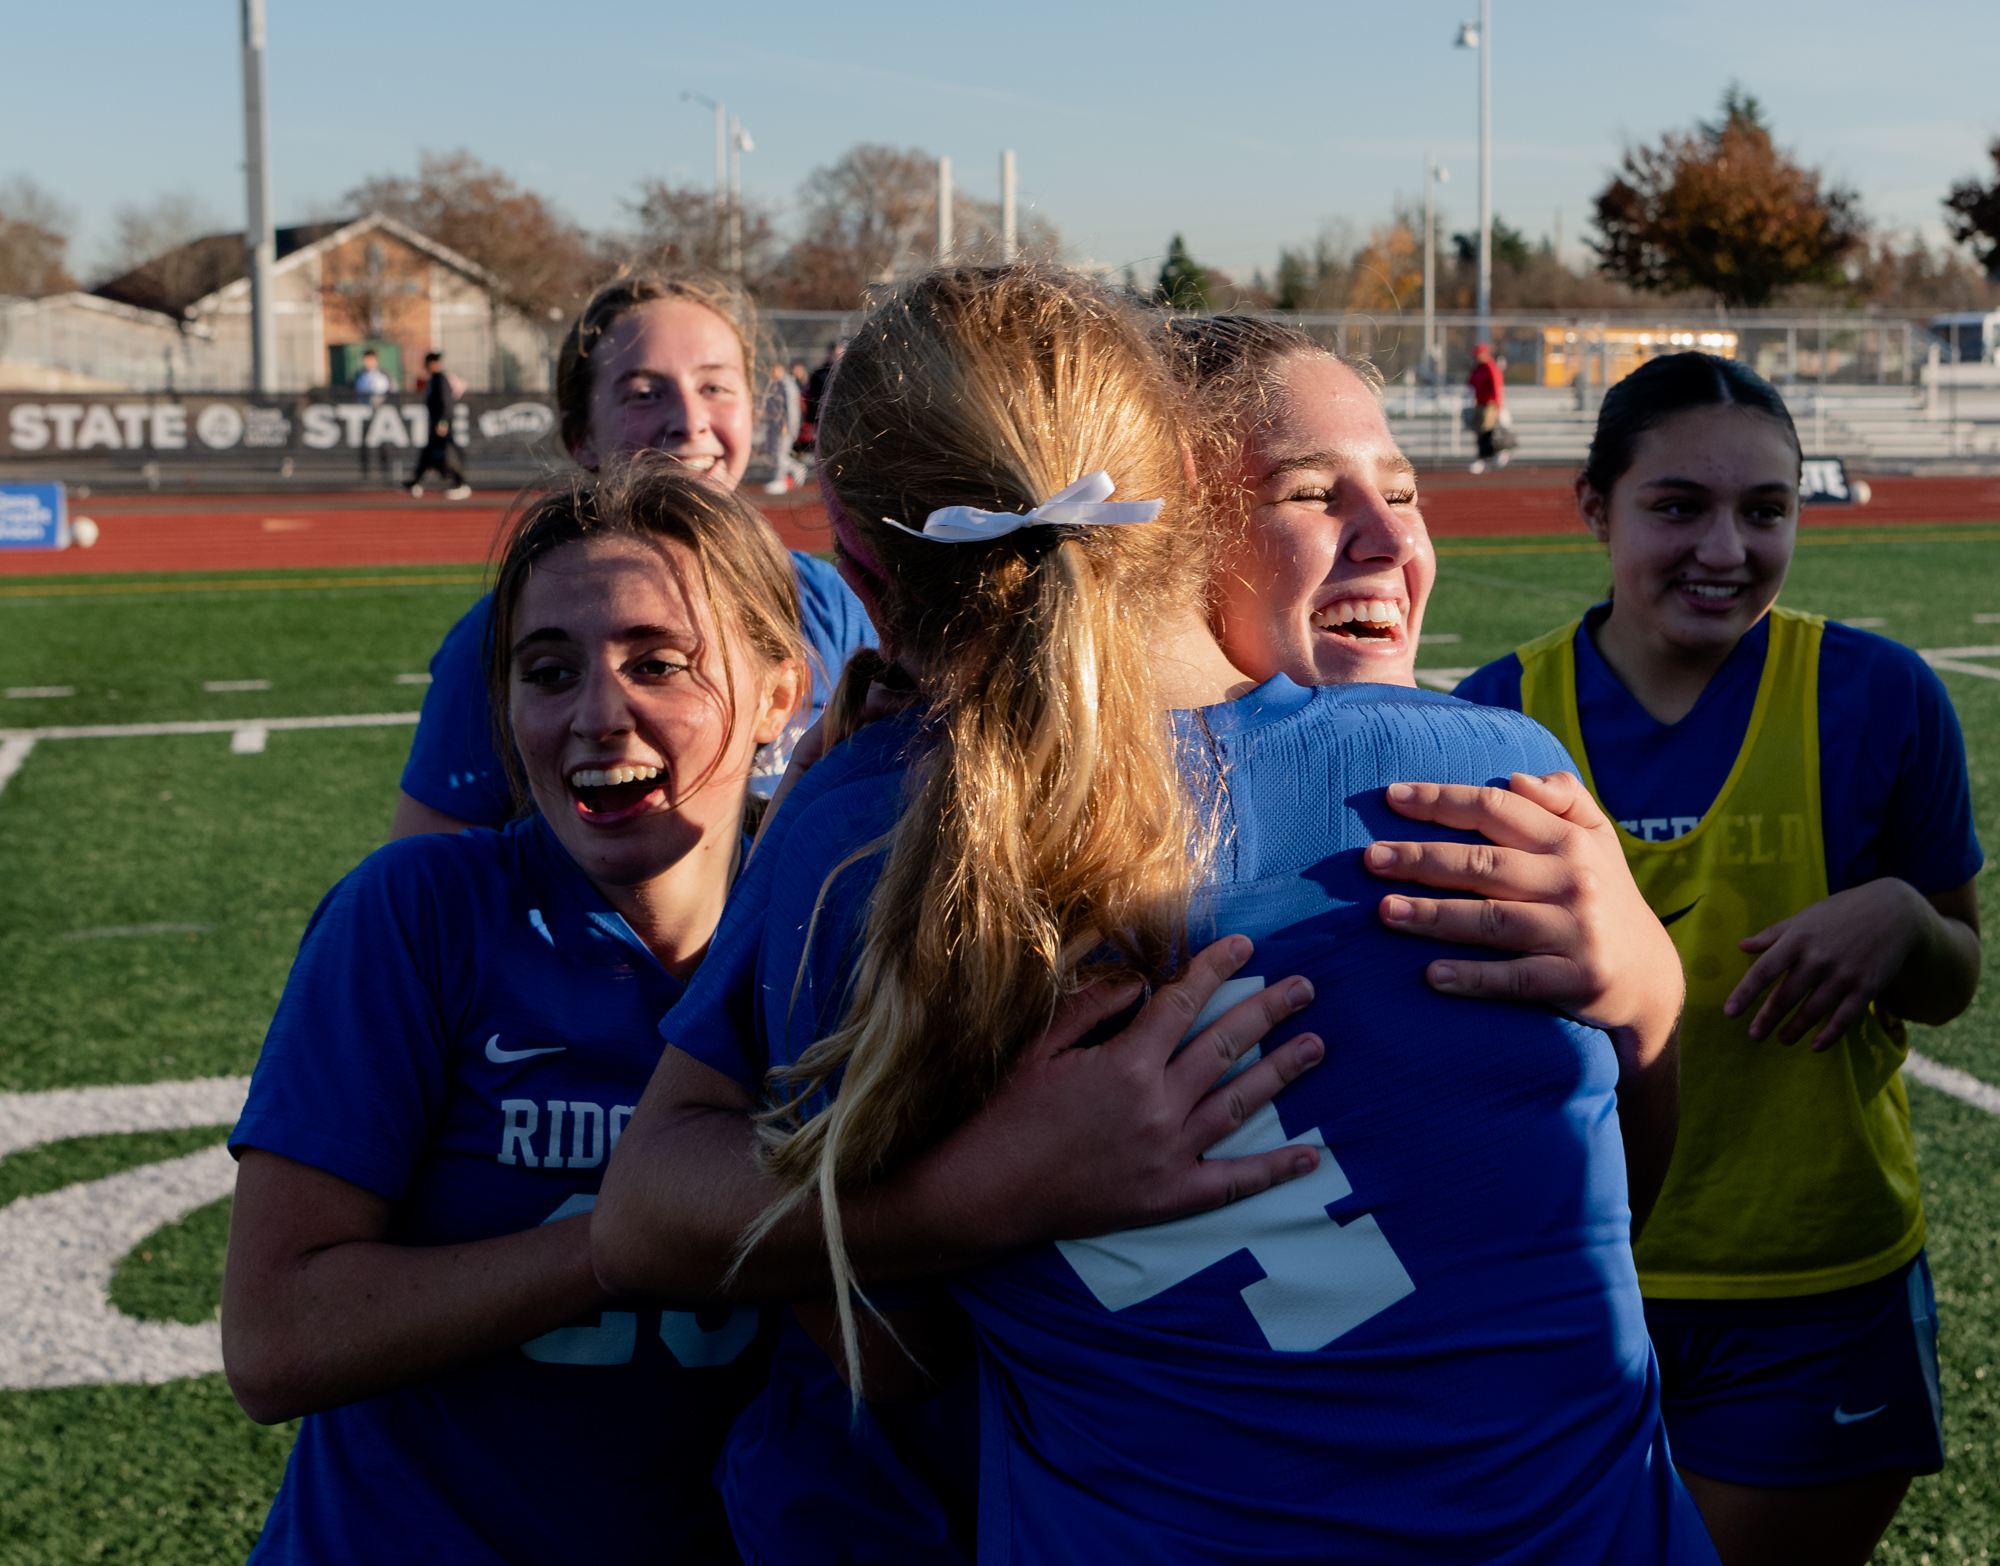 Ridgefield junior midfielder Nora Martin and Ridgefield senior defender Keaira Farley share a hug after a 1-0 win over Columbia River in a 2A State girls soccer semifinal game on Friday, Nov. 17, 2023, at Mount Tahoma Stadium in Tacoma.